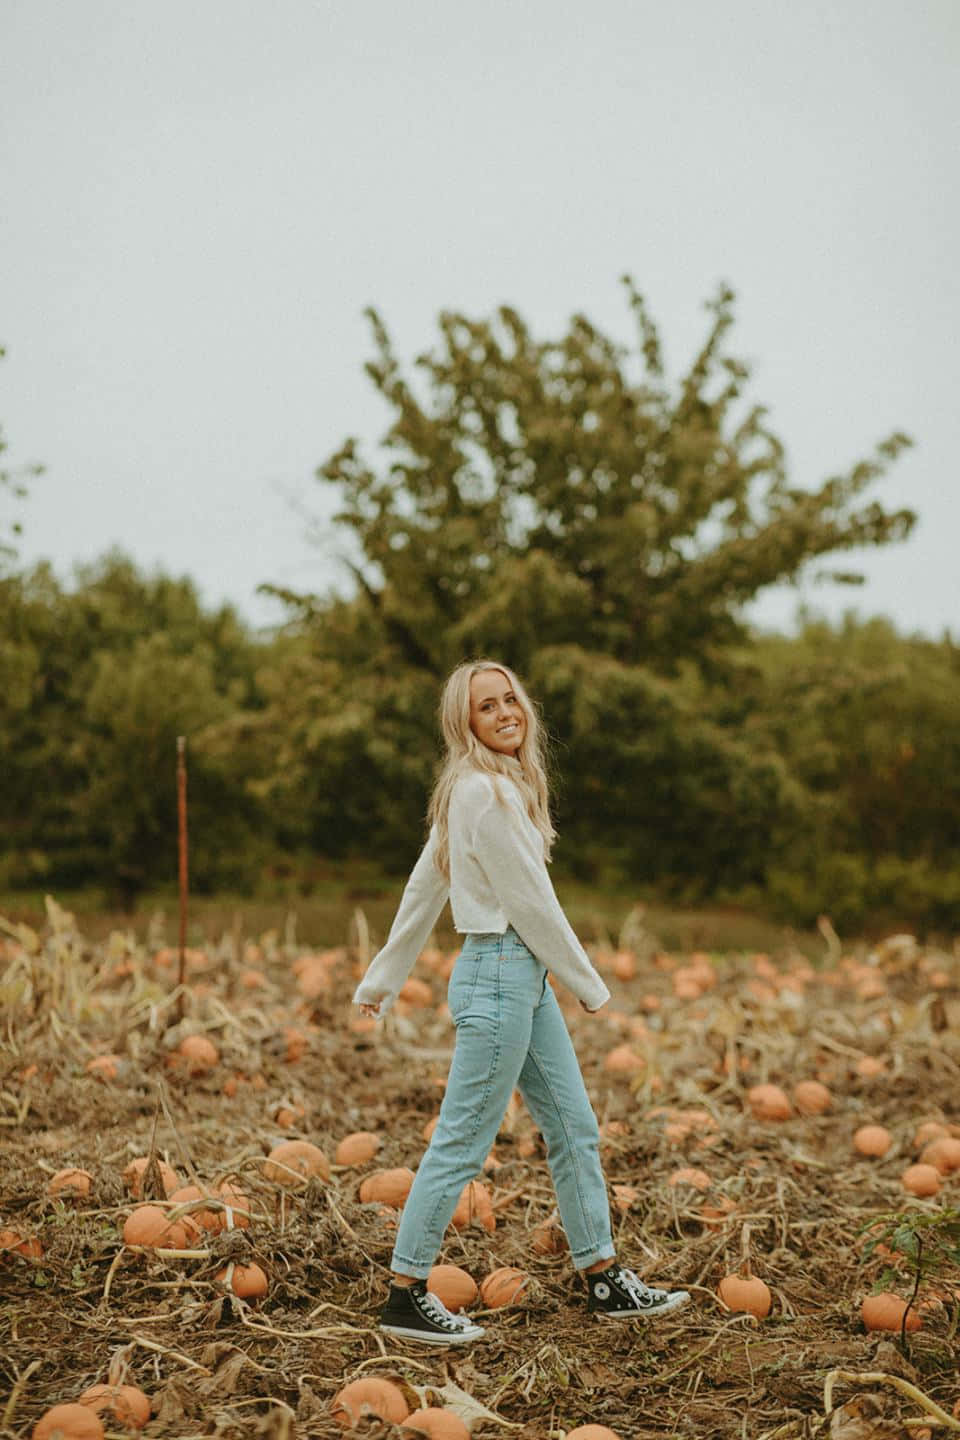 Celebrate your Senior year with a lasting memory - Fall photoshoot